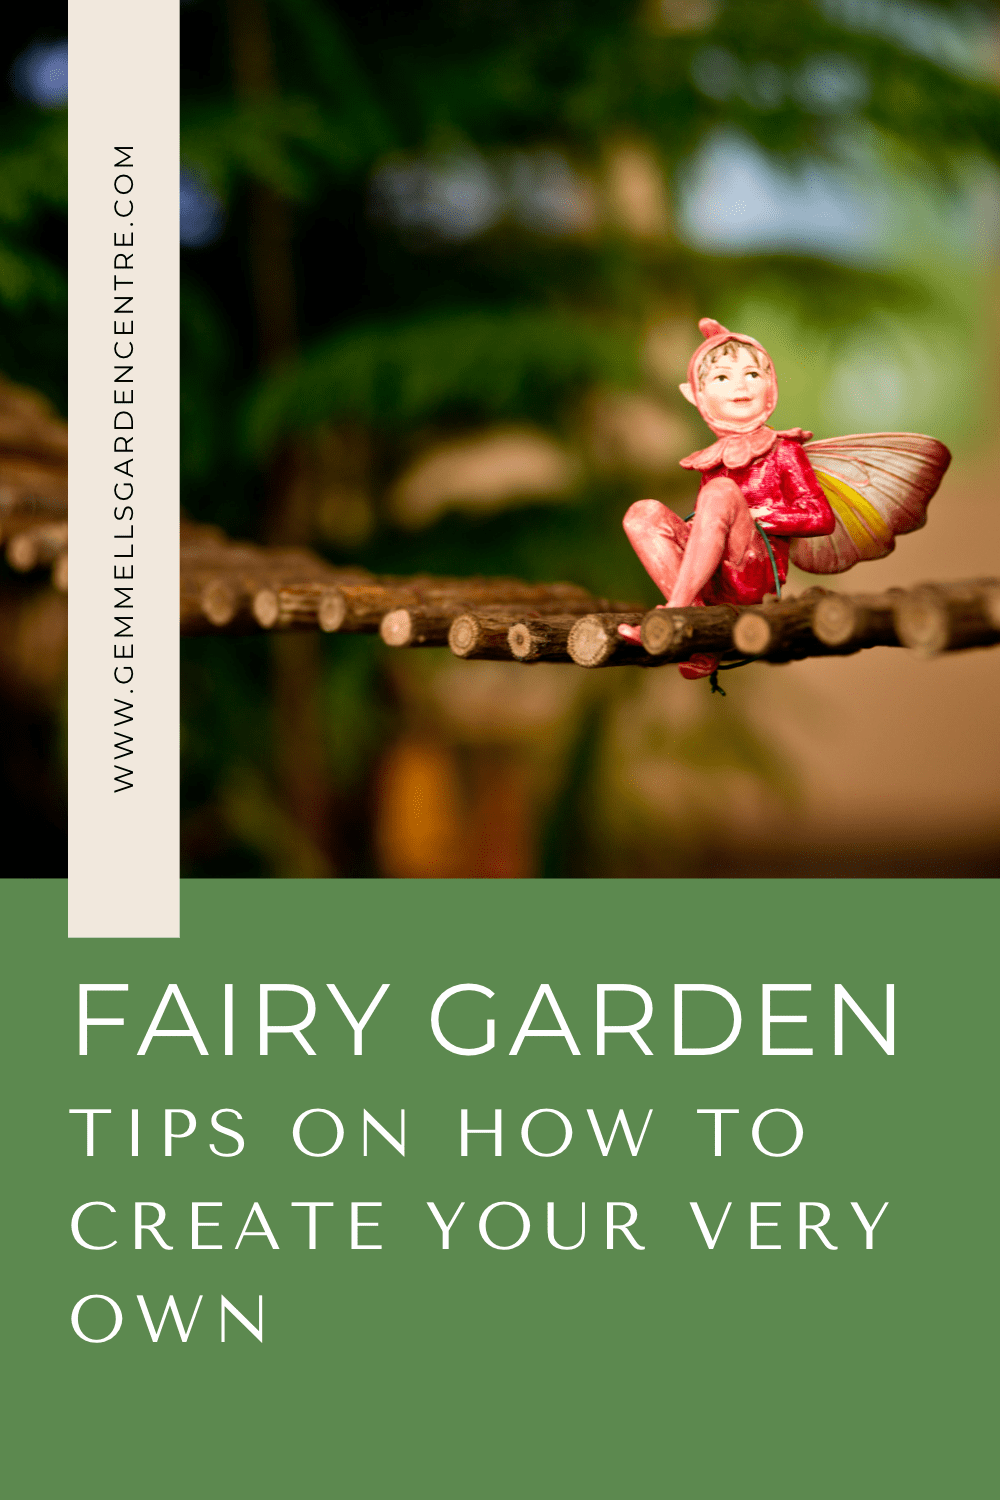 Tips on How to Create Your Very Own Fairy Garden